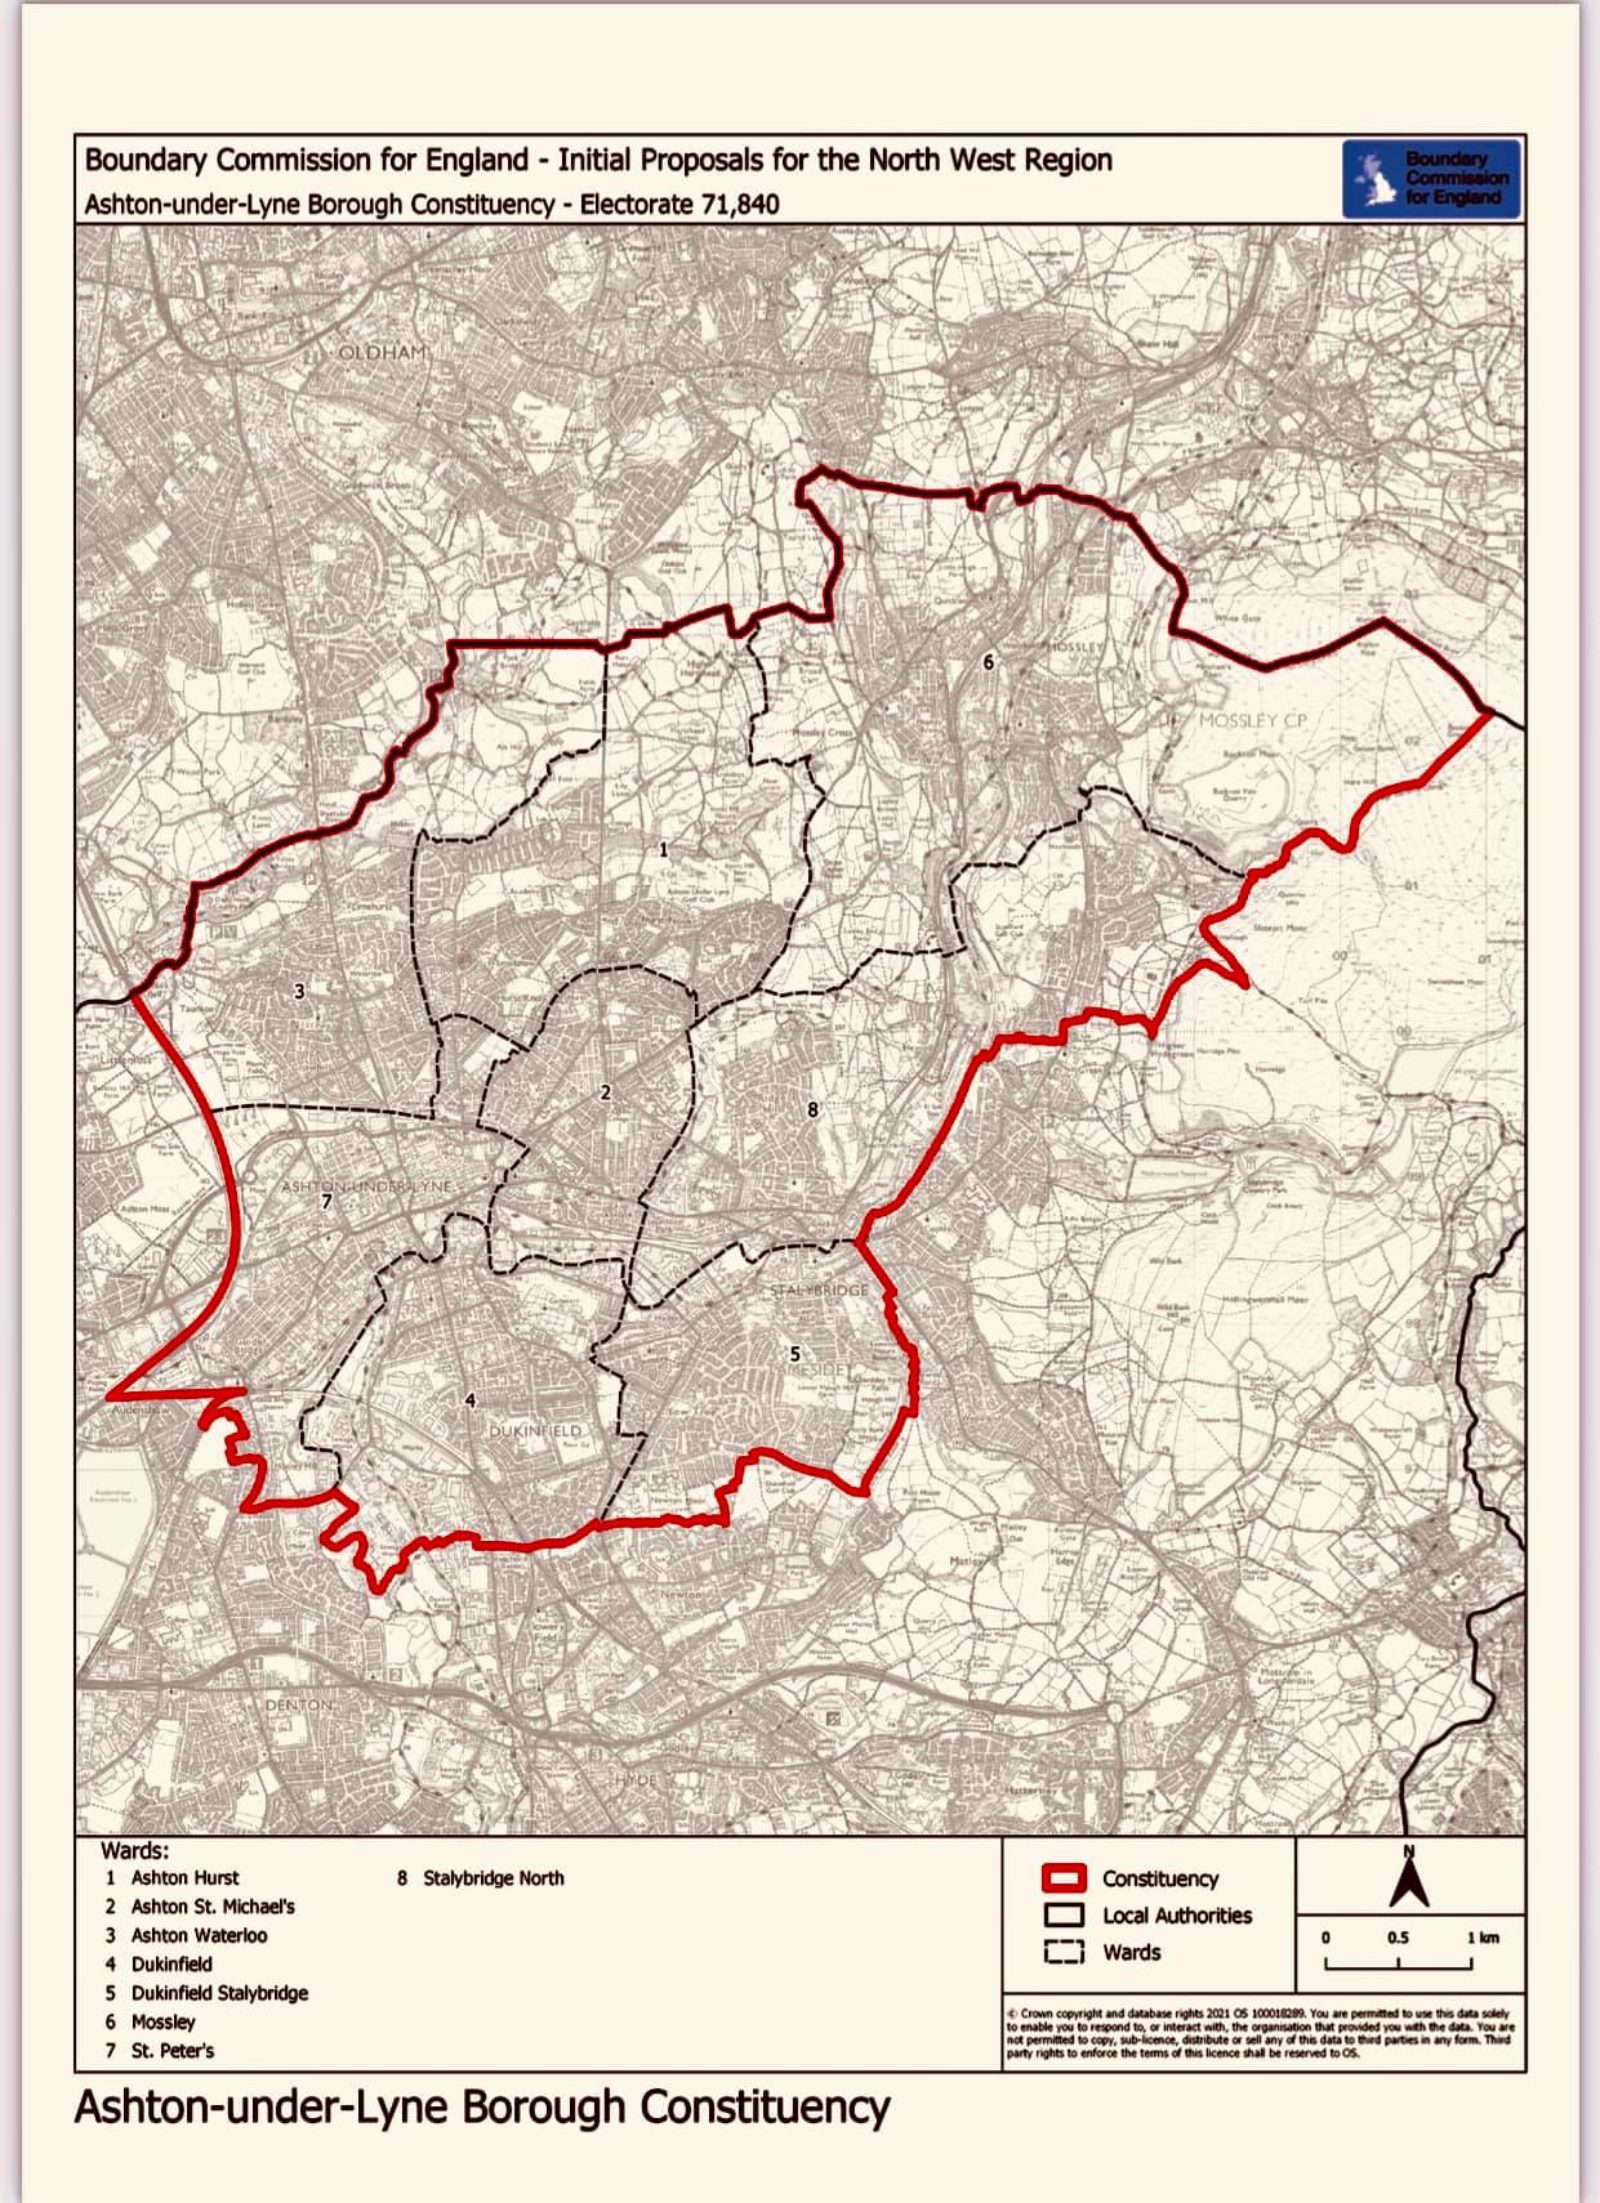 The proposed new Ashton Constituency